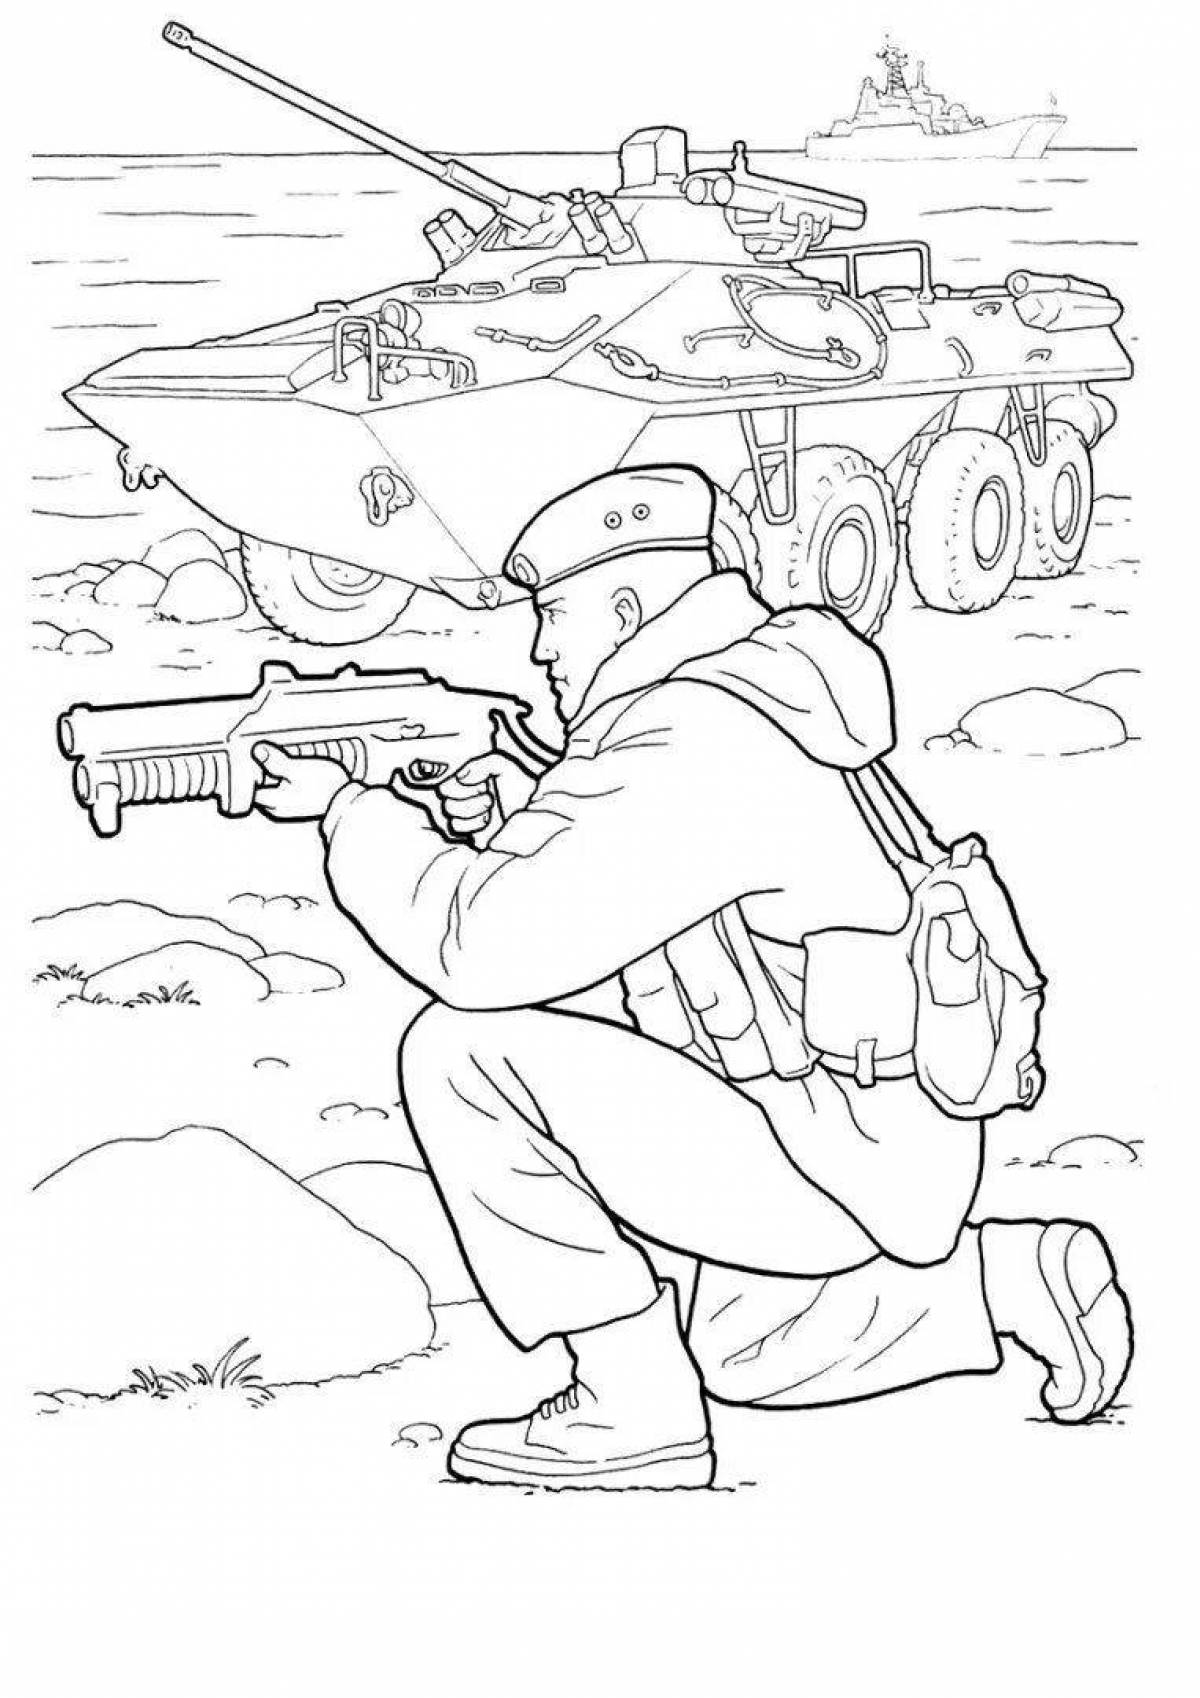 Cute russian soldier coloring pages for kids